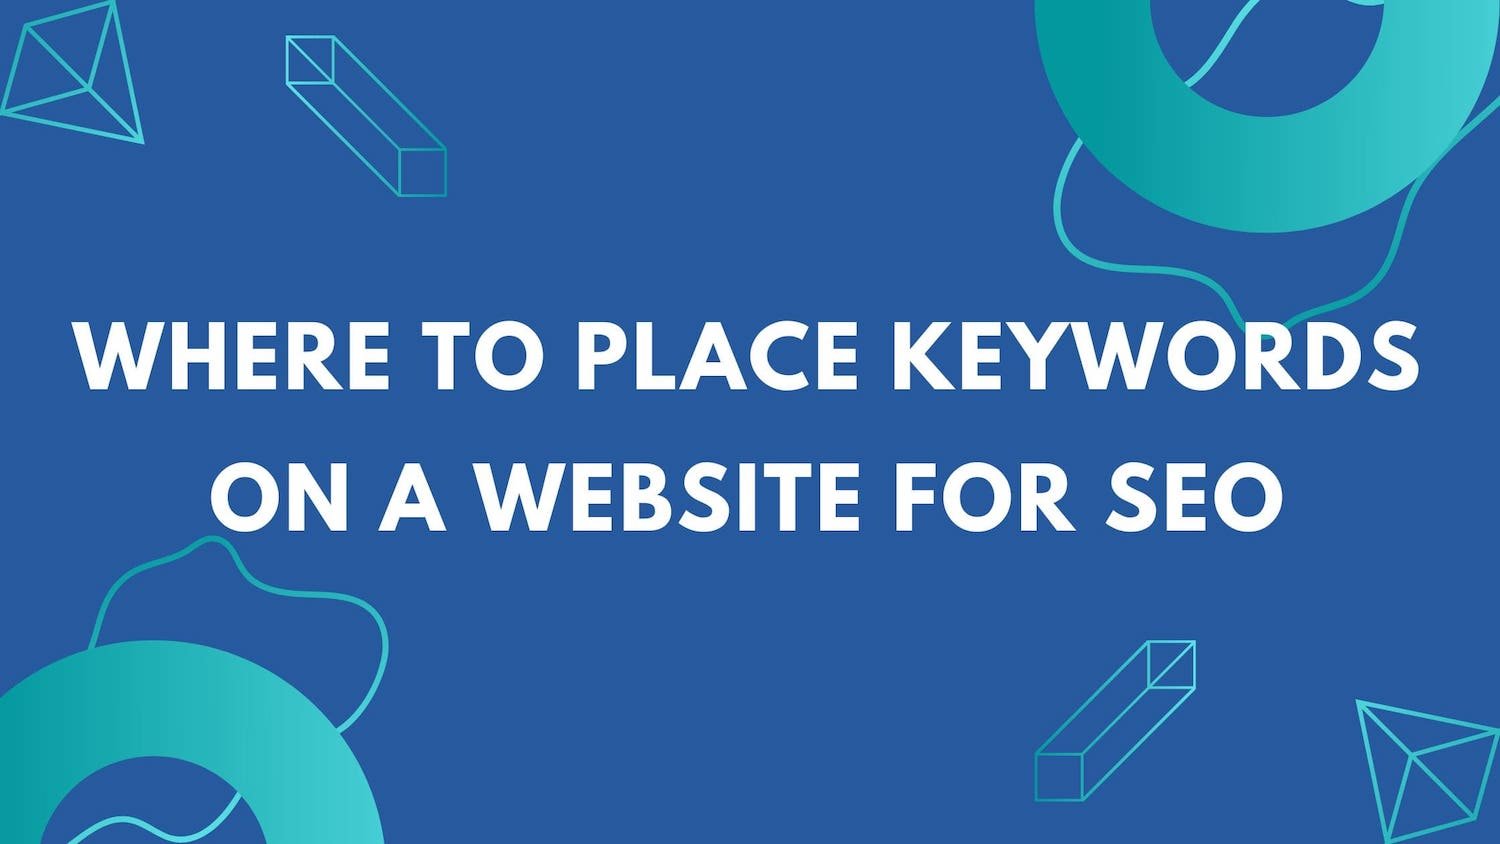 Keywords on a website Where to place keywords for SEO